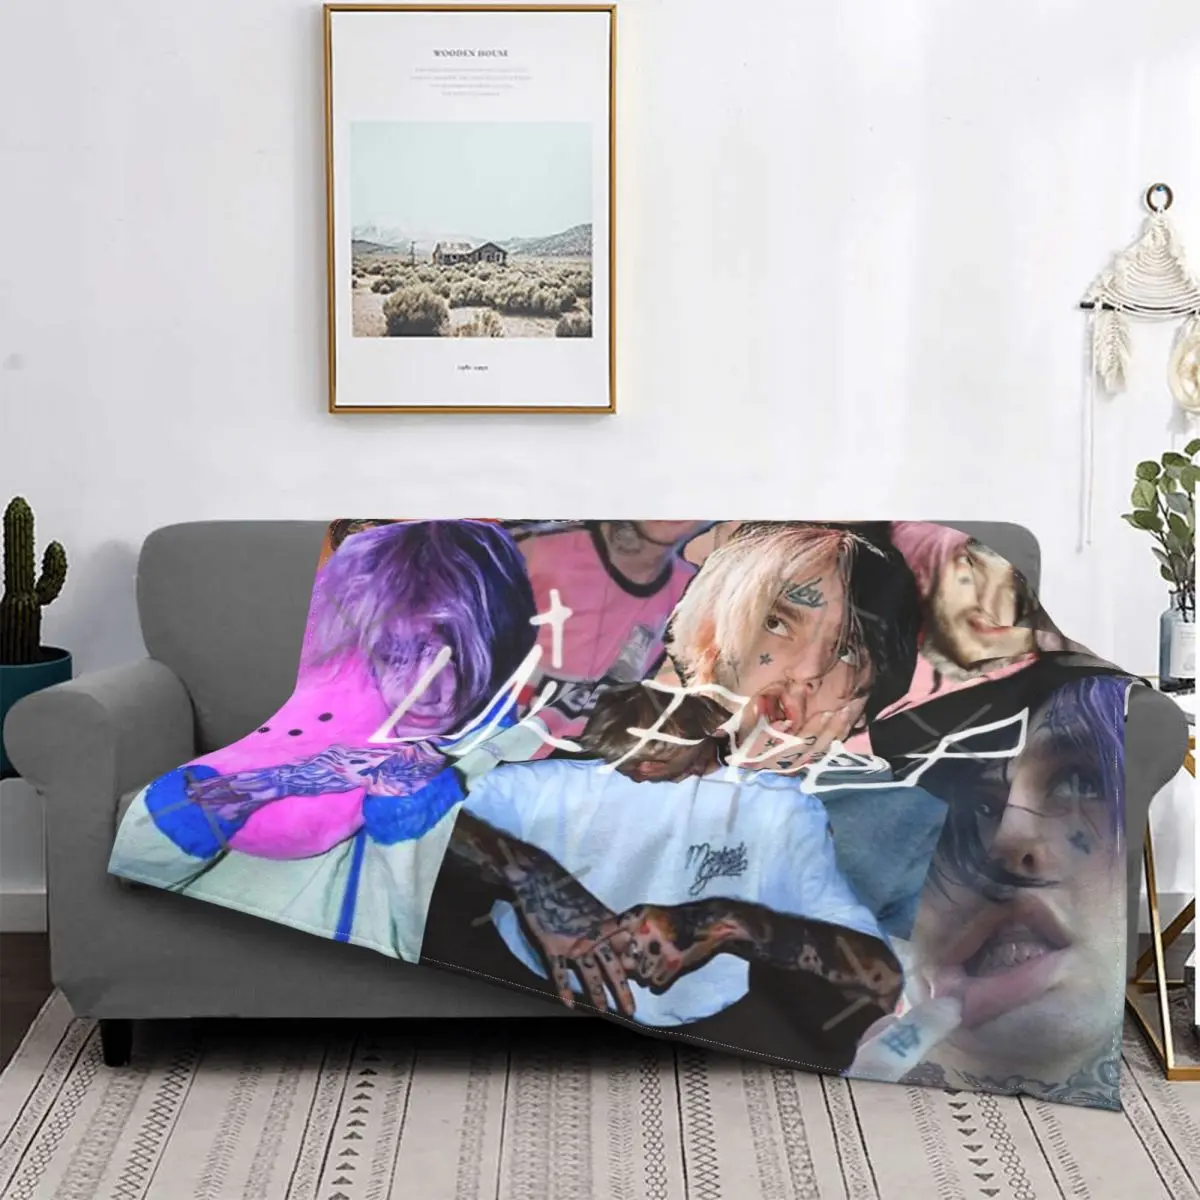 

Lil Peep Life In Images Blanket Bedspread Bed Plaid Sofa Bed Anime Plush Kawaii Blanket Bedding And Covers